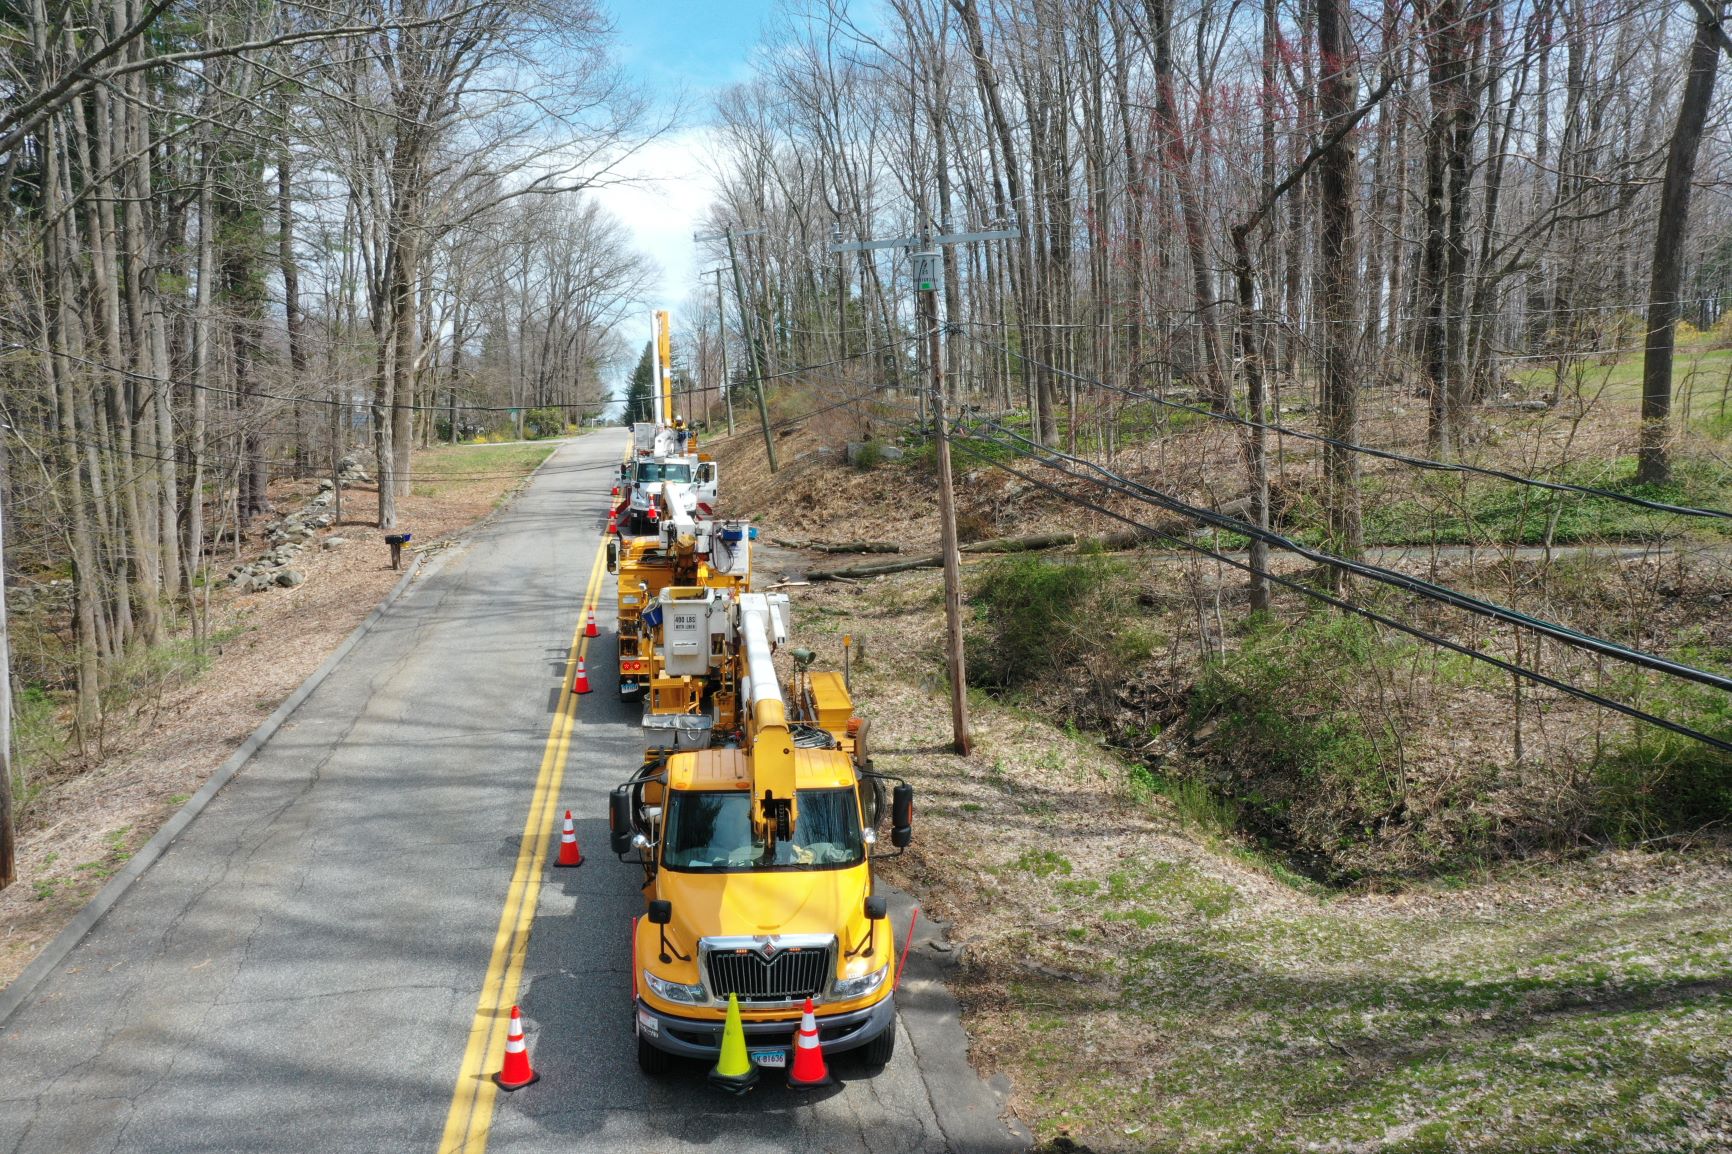 Eversource crews teamed up while maintaining social distancing to get the power back on in Columbia, Connecticut